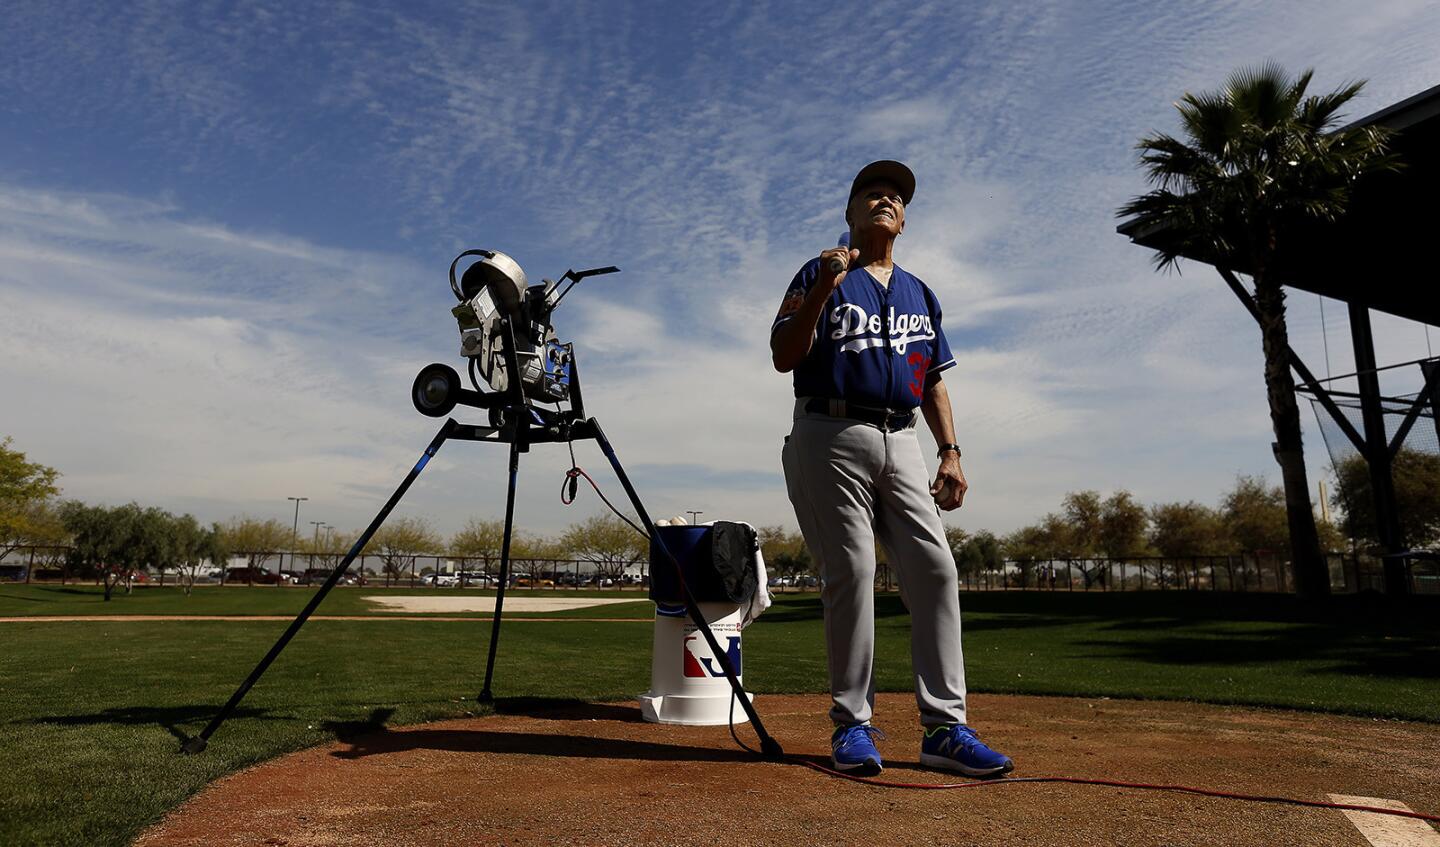 Former Dodgers shortstop Maury Wills gives instruction during a bunting drill at spring training in Glendale, Ariz.